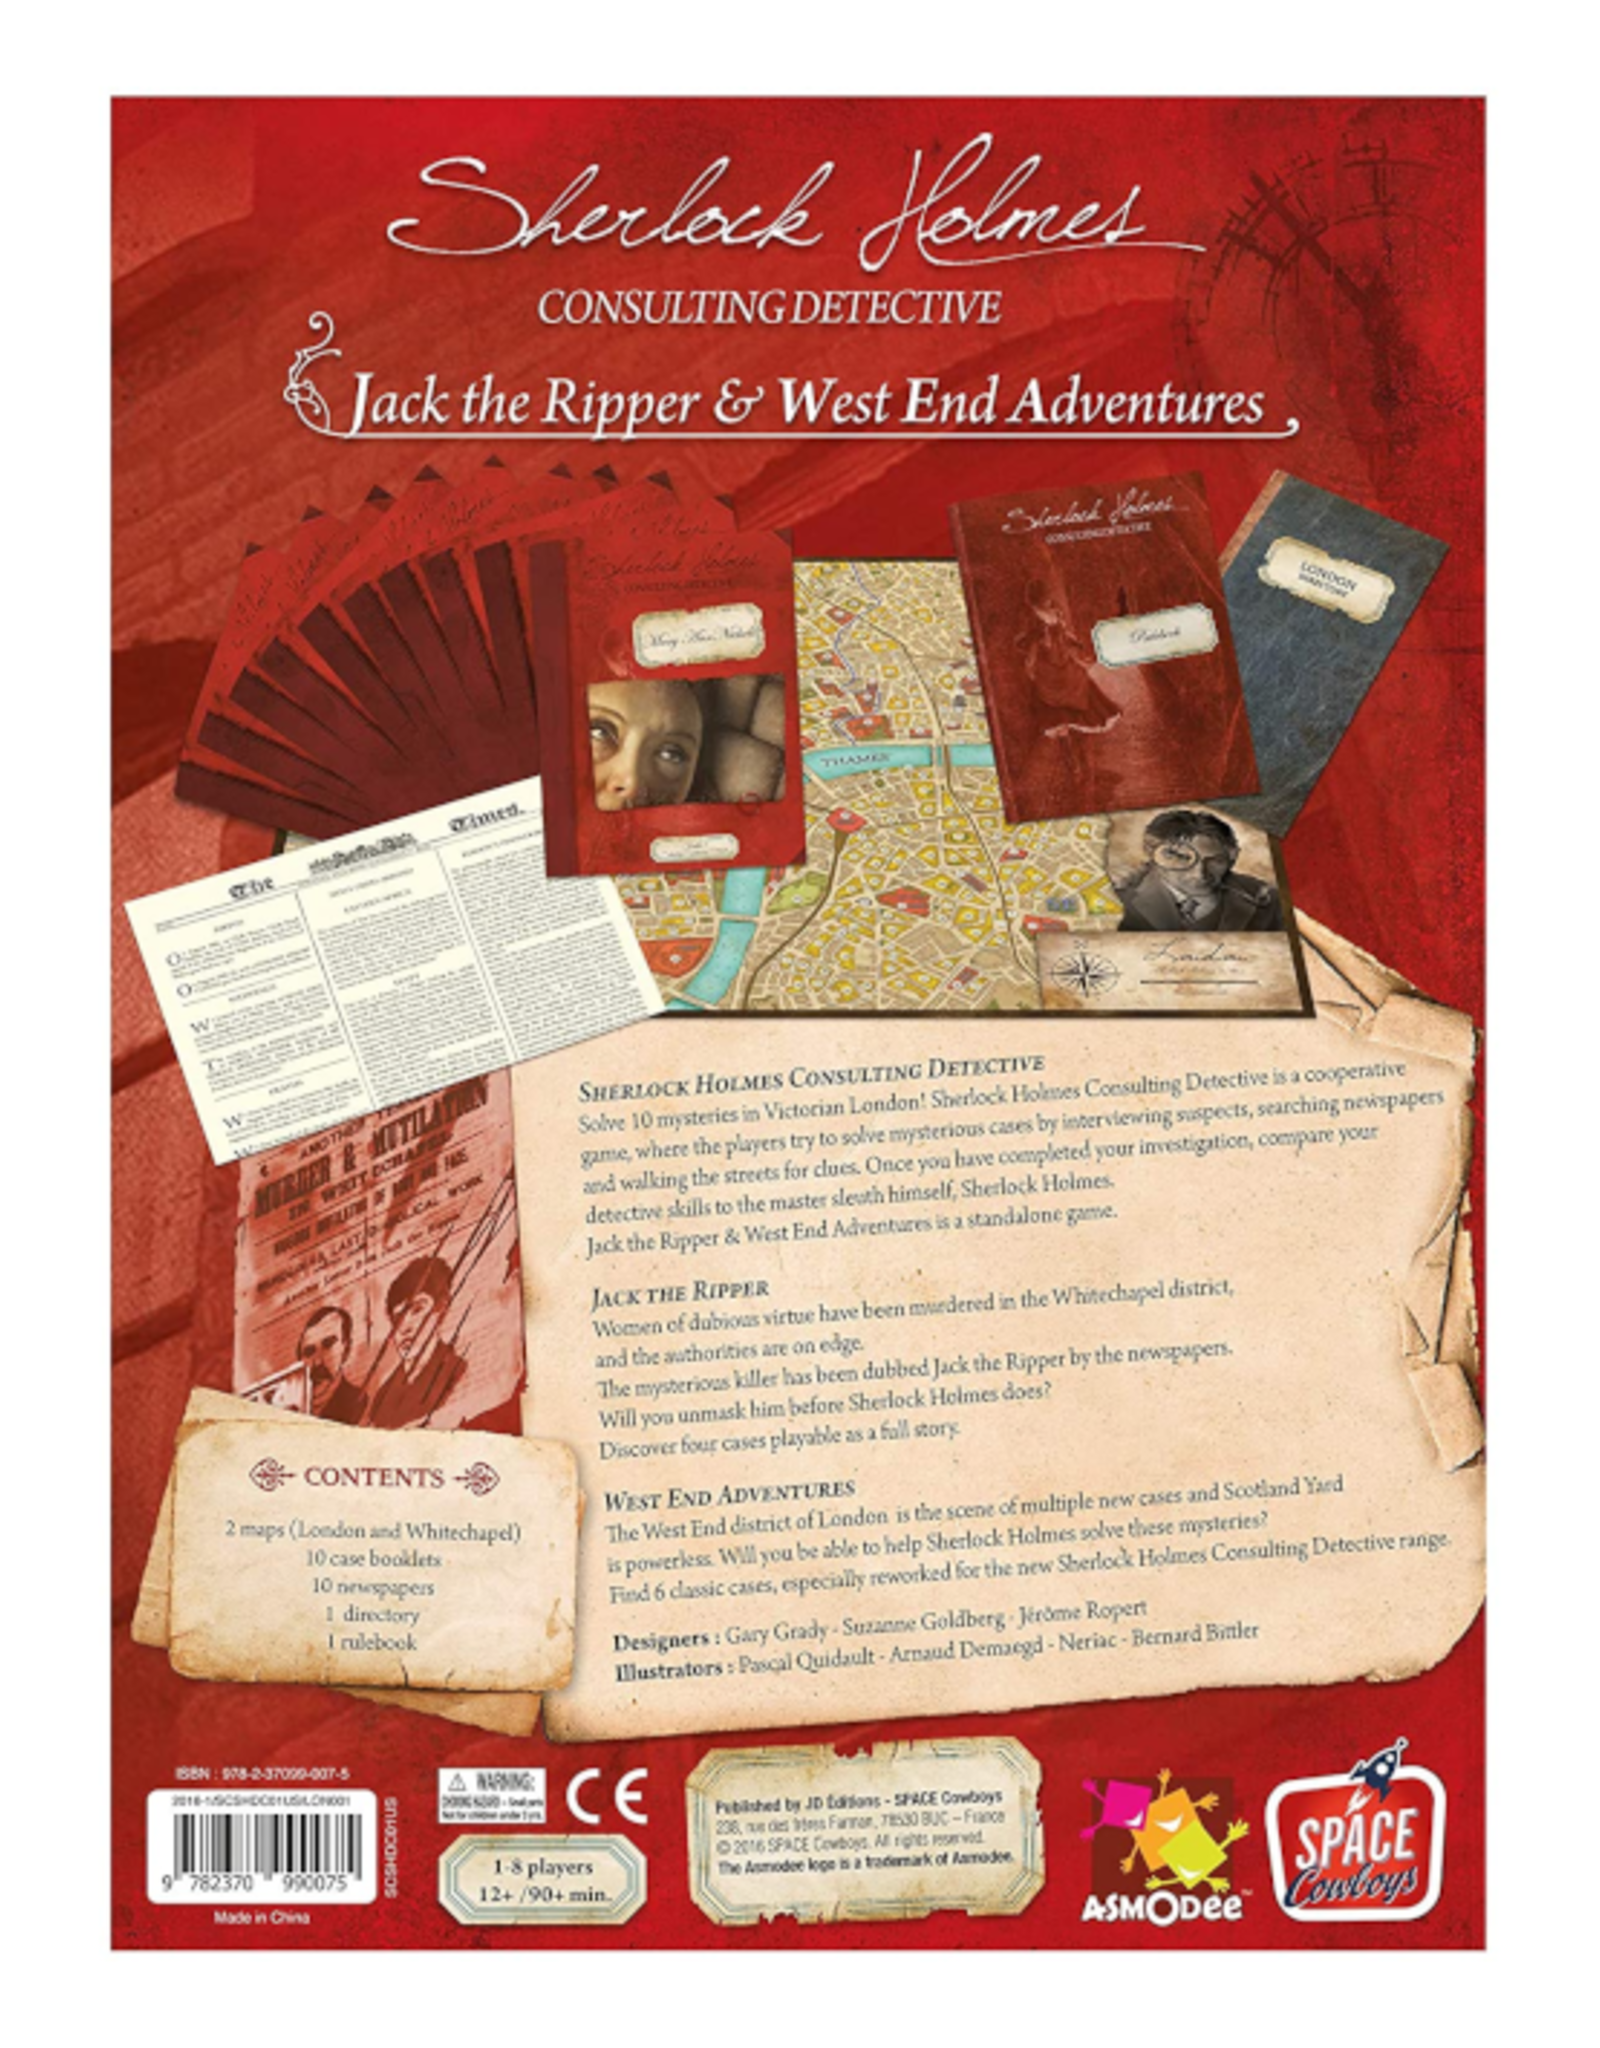 Space Cowboys Space Cowboys - Sherlock Holmes Consulting Detective - Jack the Ripper & West End Adventures